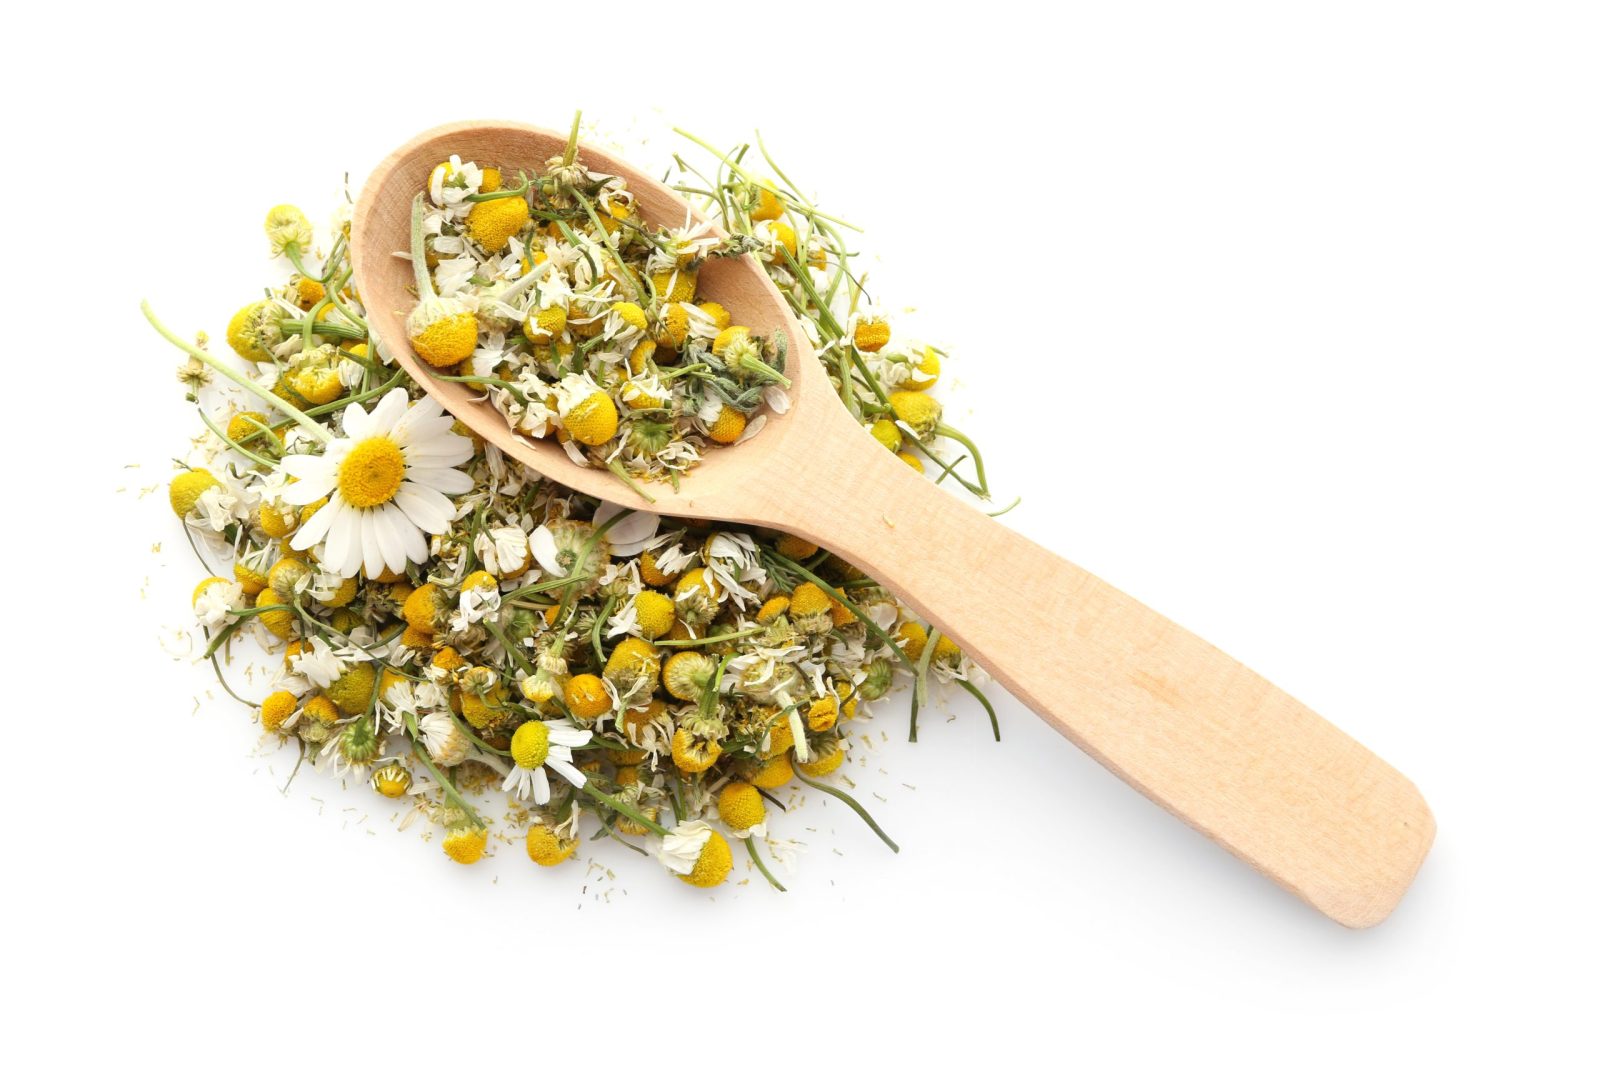 Dried chamomile tea with a wooden spoon